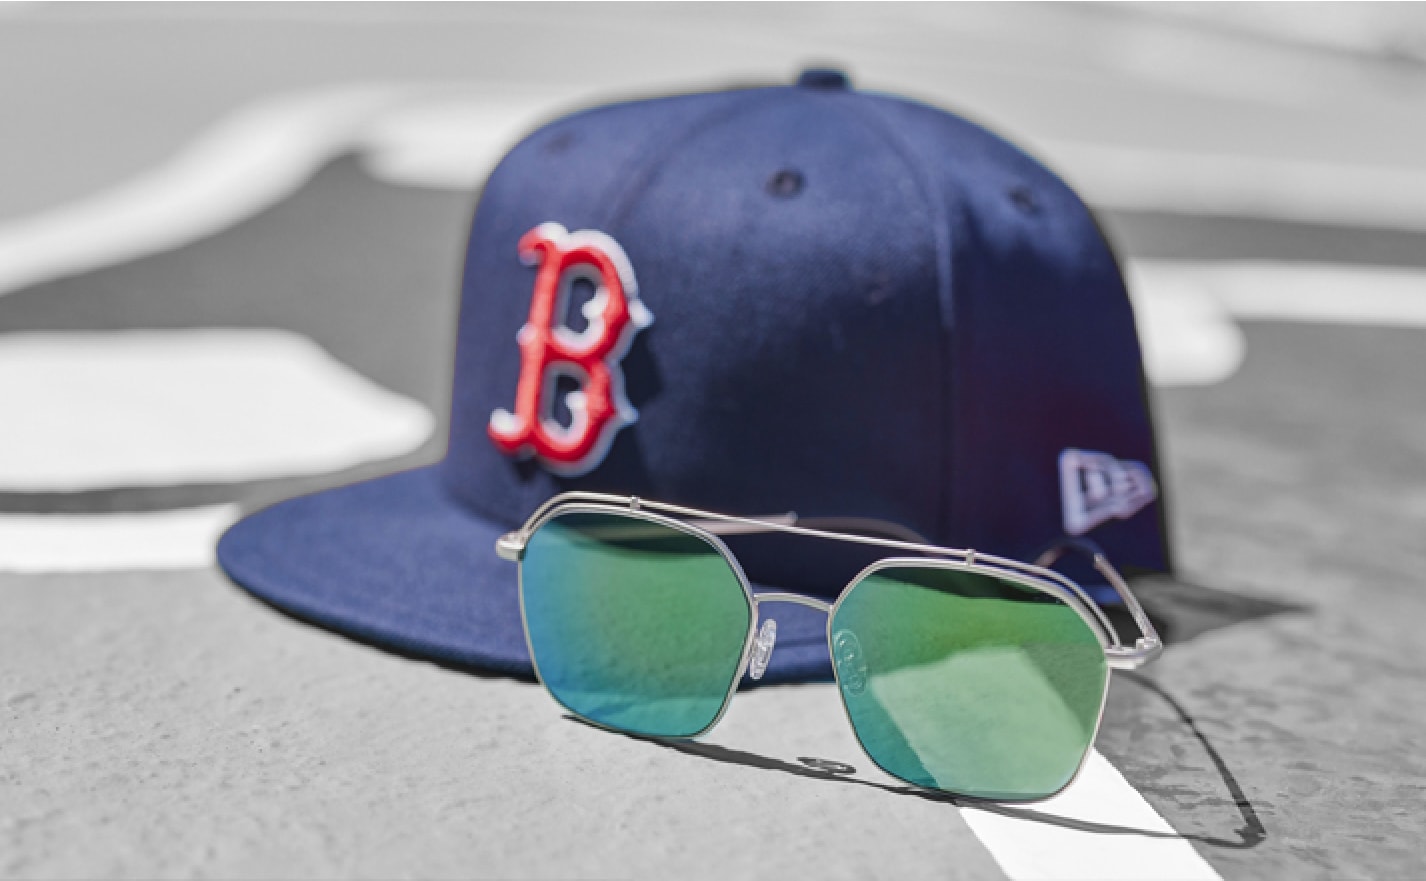 Image of a Boston Red Sox hat resting on a baseball base, with a pair of Zenni glasses in front of it.